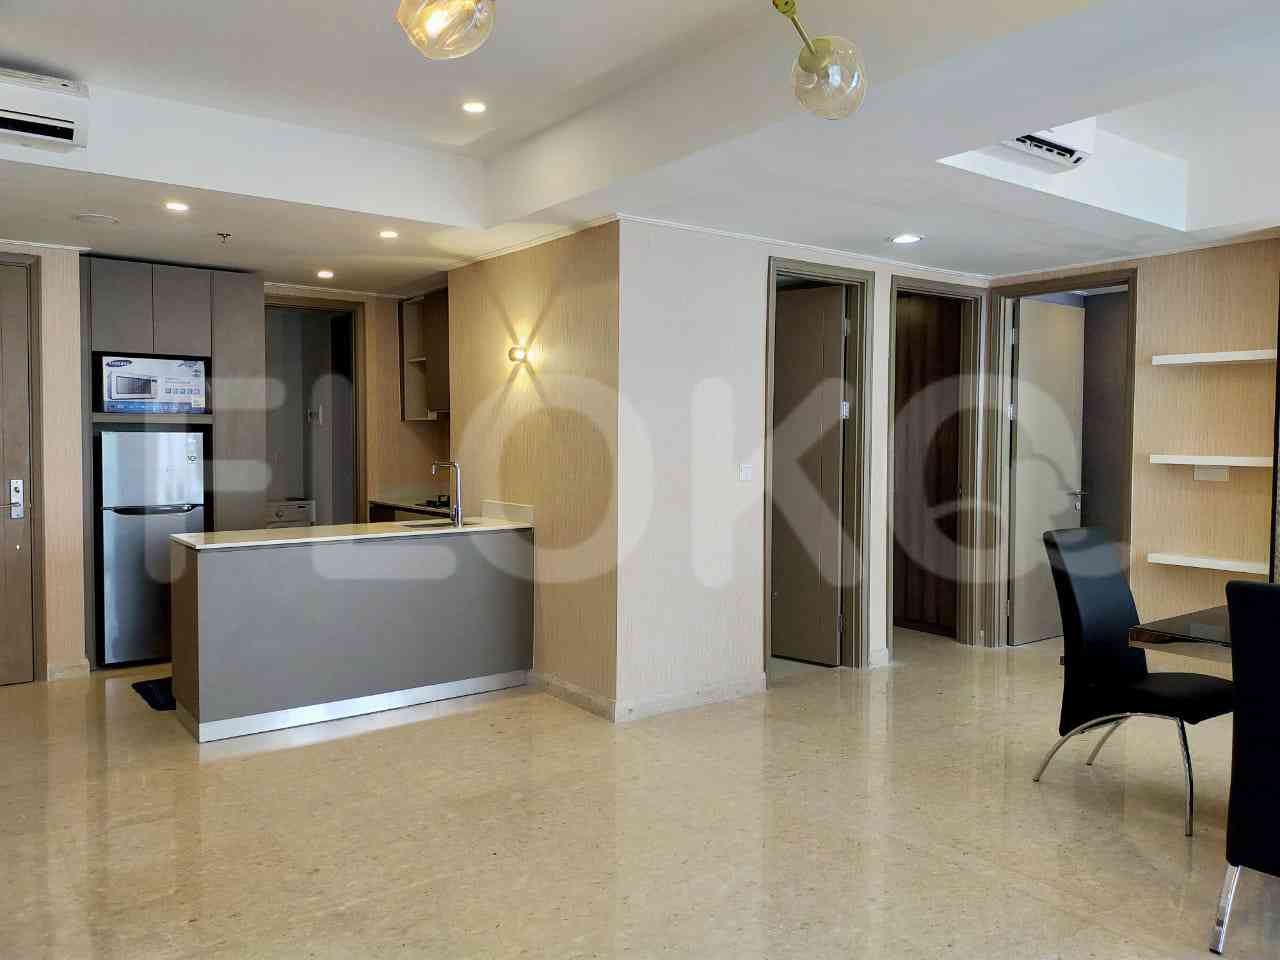 3 Bedroom on 13th Floor for Rent in Gold Coast Apartment - fka11a 7